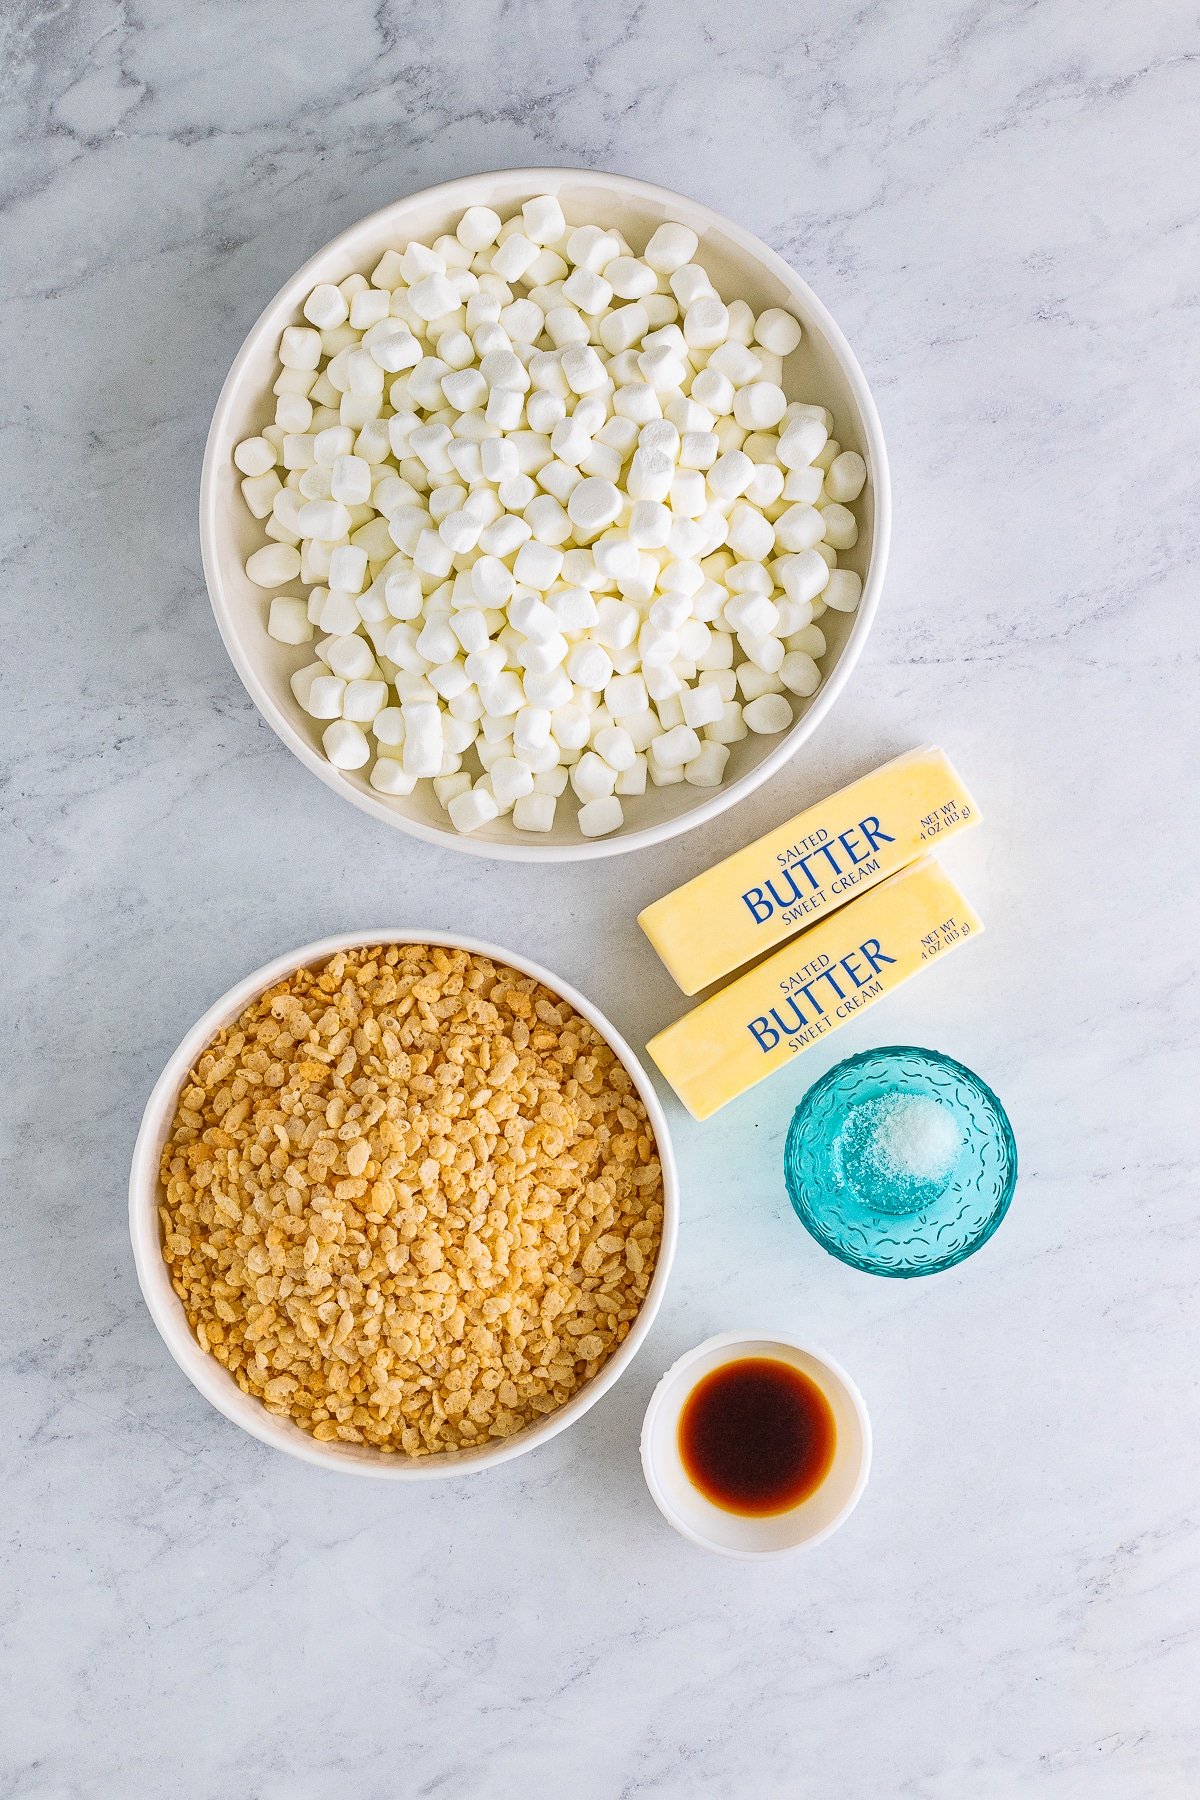 Ingredients on how to make a Rice Krispies Treats Recipe.